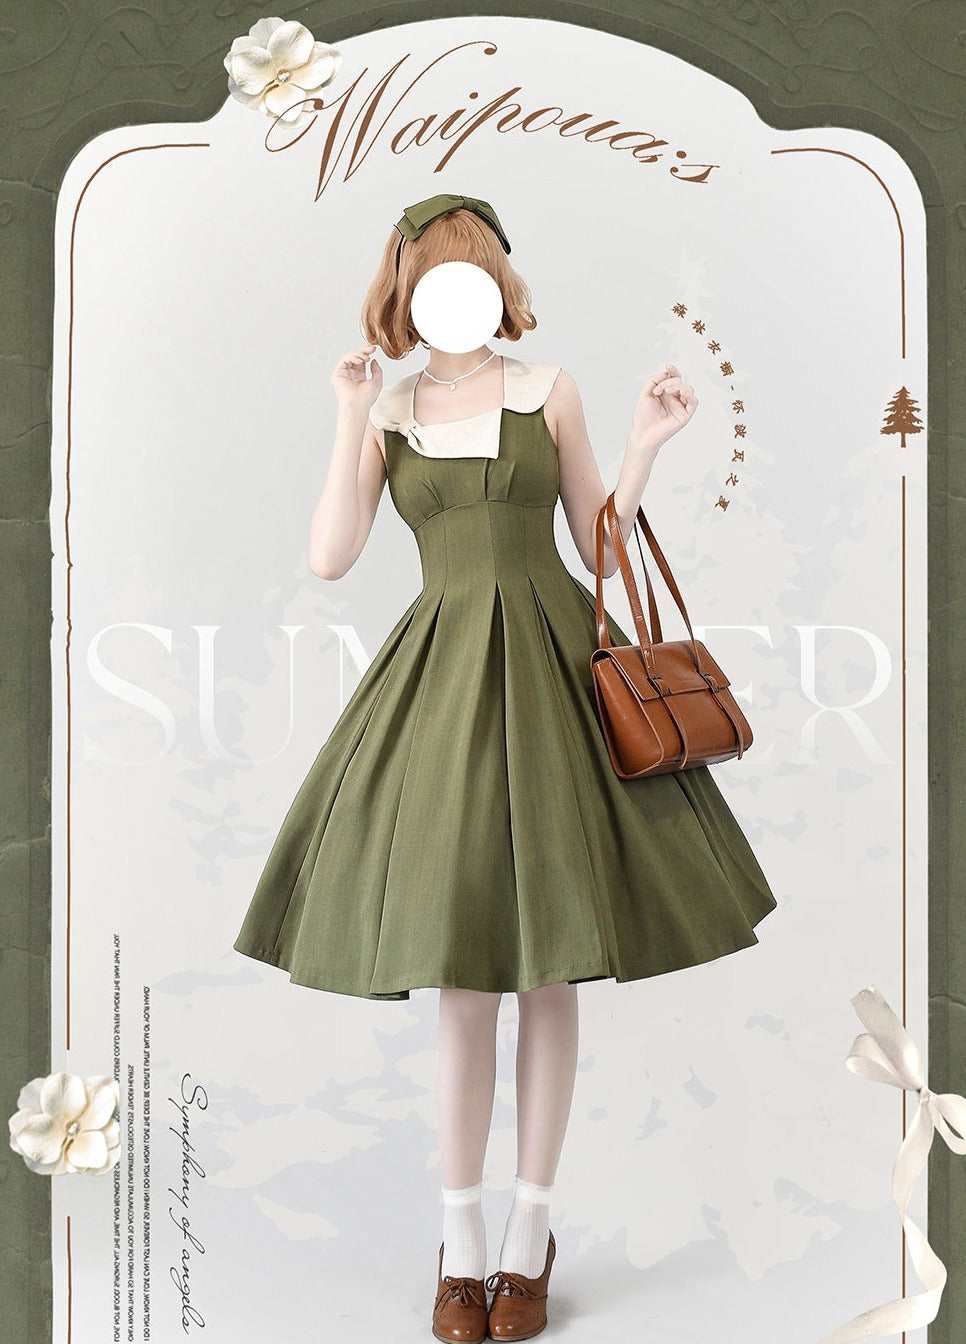 [Reservation sale] Summer Forest Elegant classical set-up with ribbon hair accessory